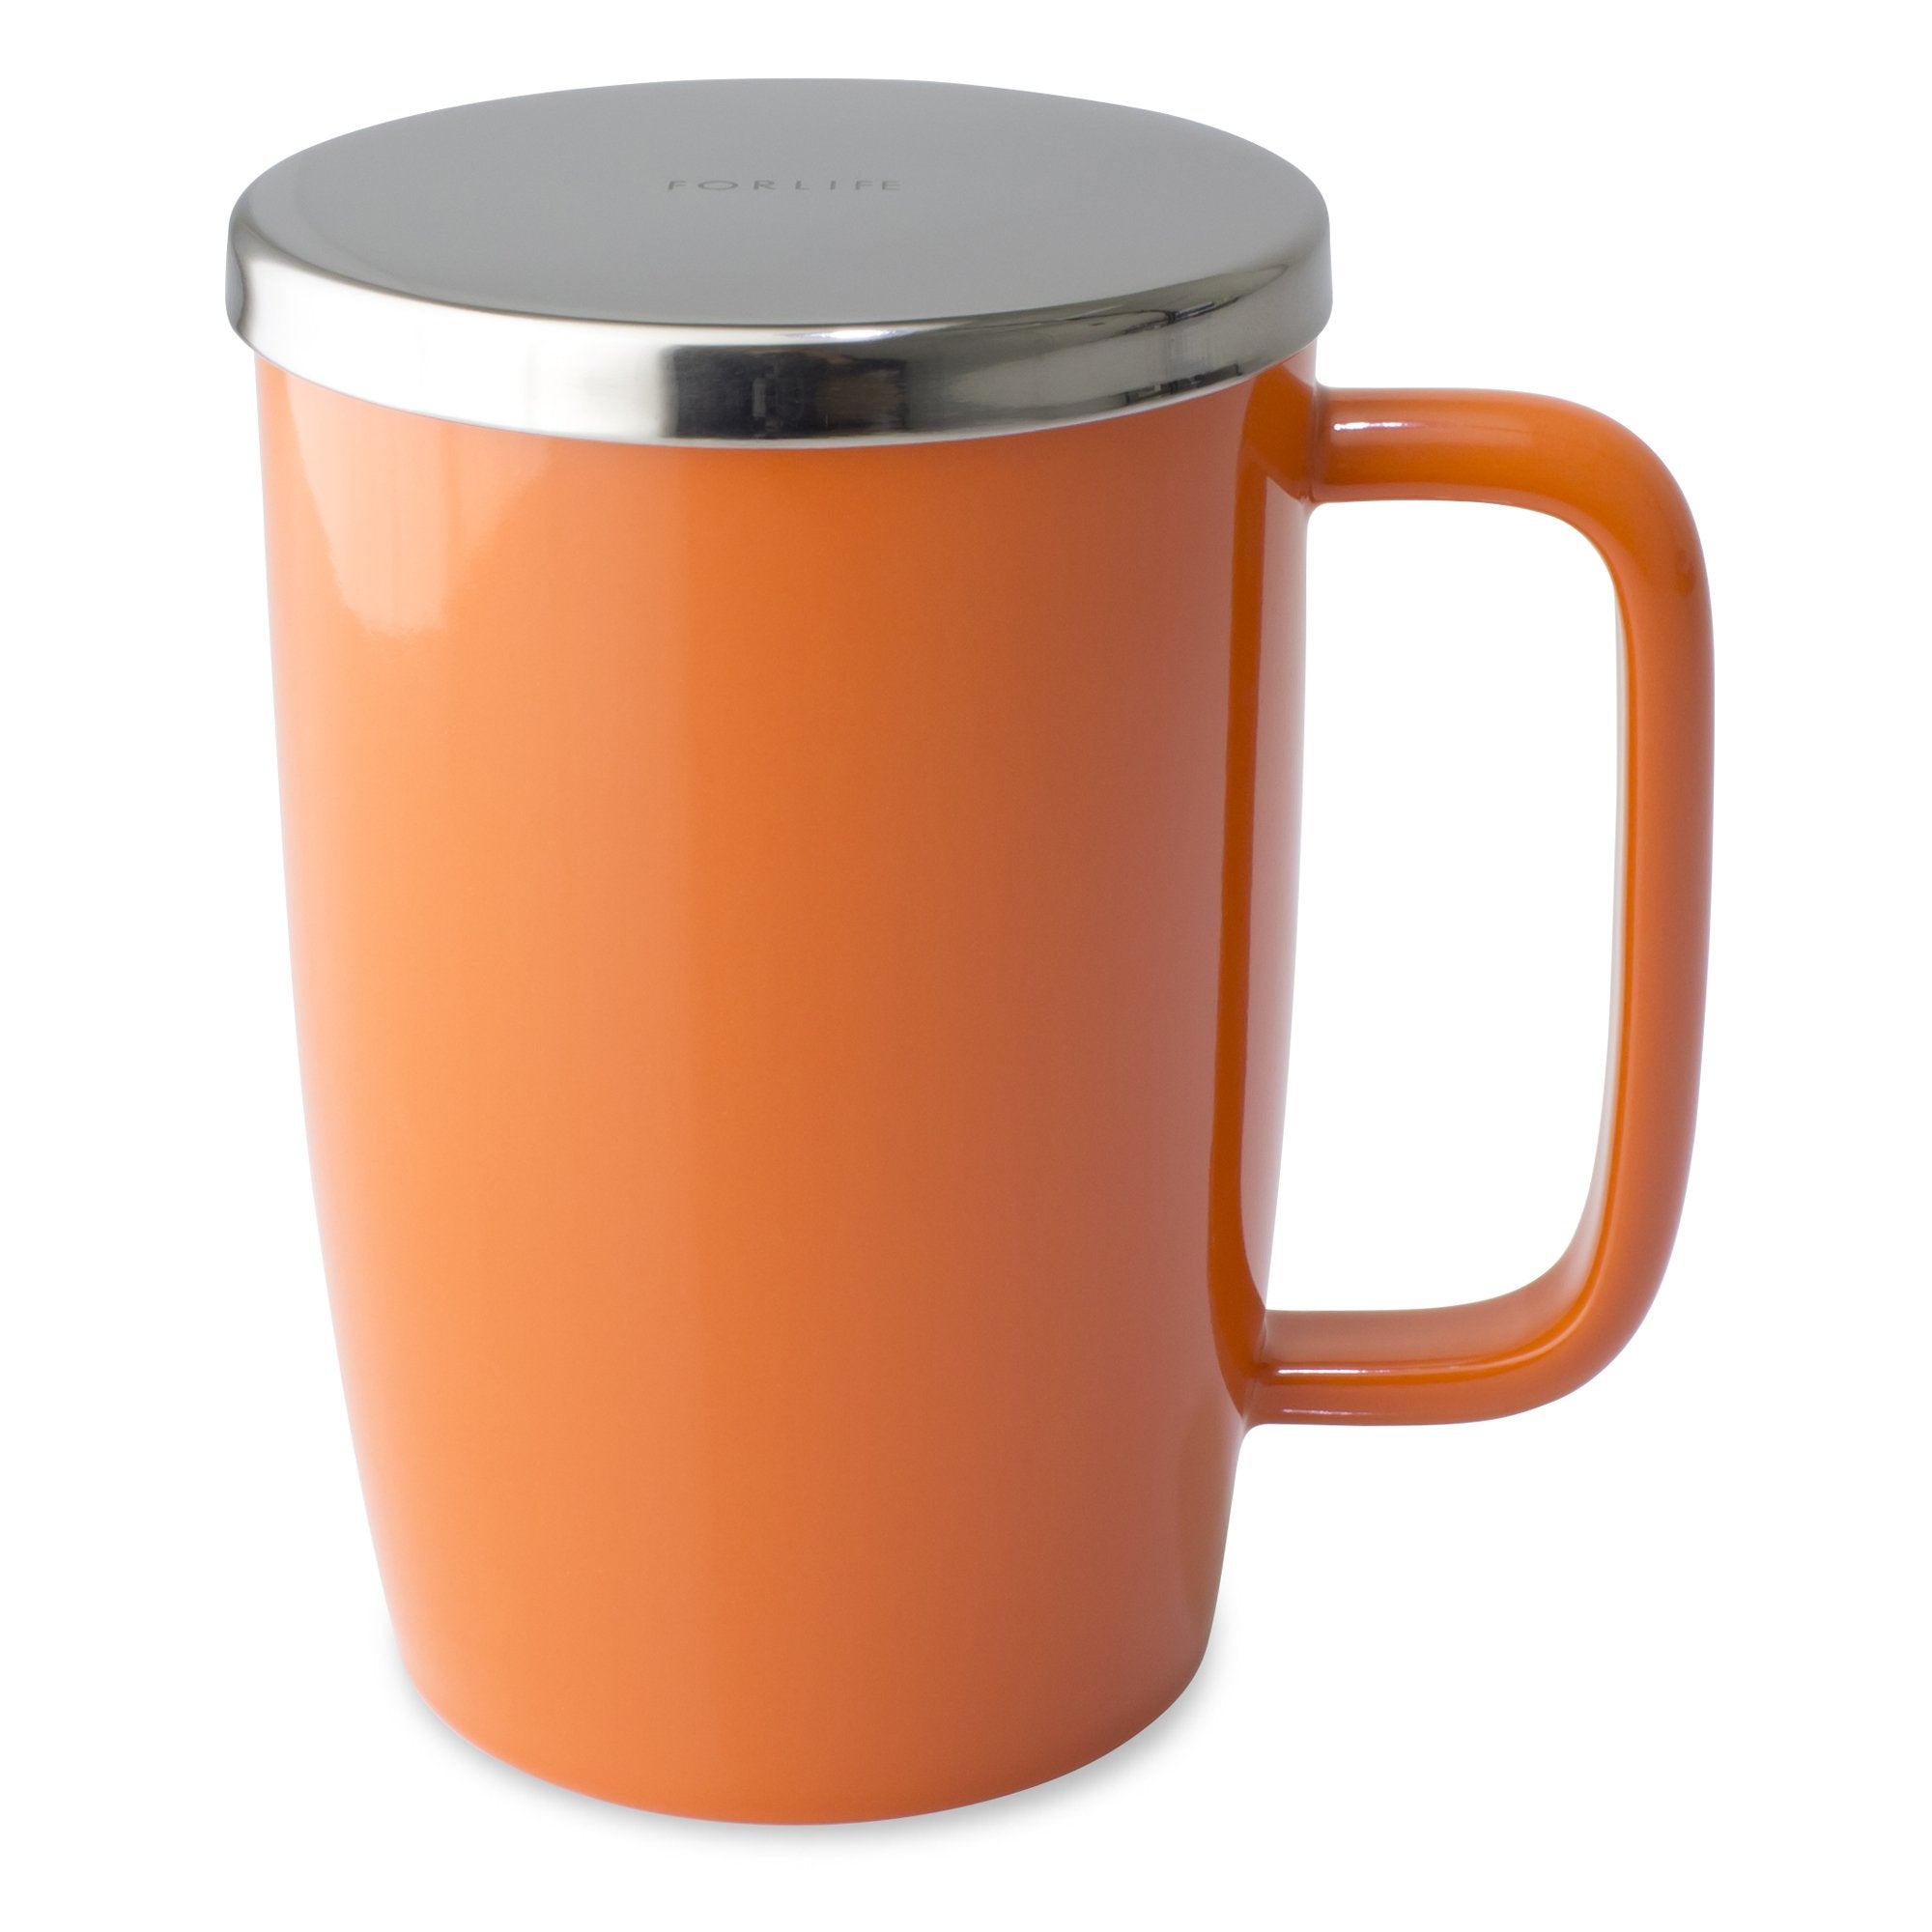 TeaLula 18 oz carrot orange colored glossy surface finish mug with large thin rectangle handle and shiny stainless steel lid